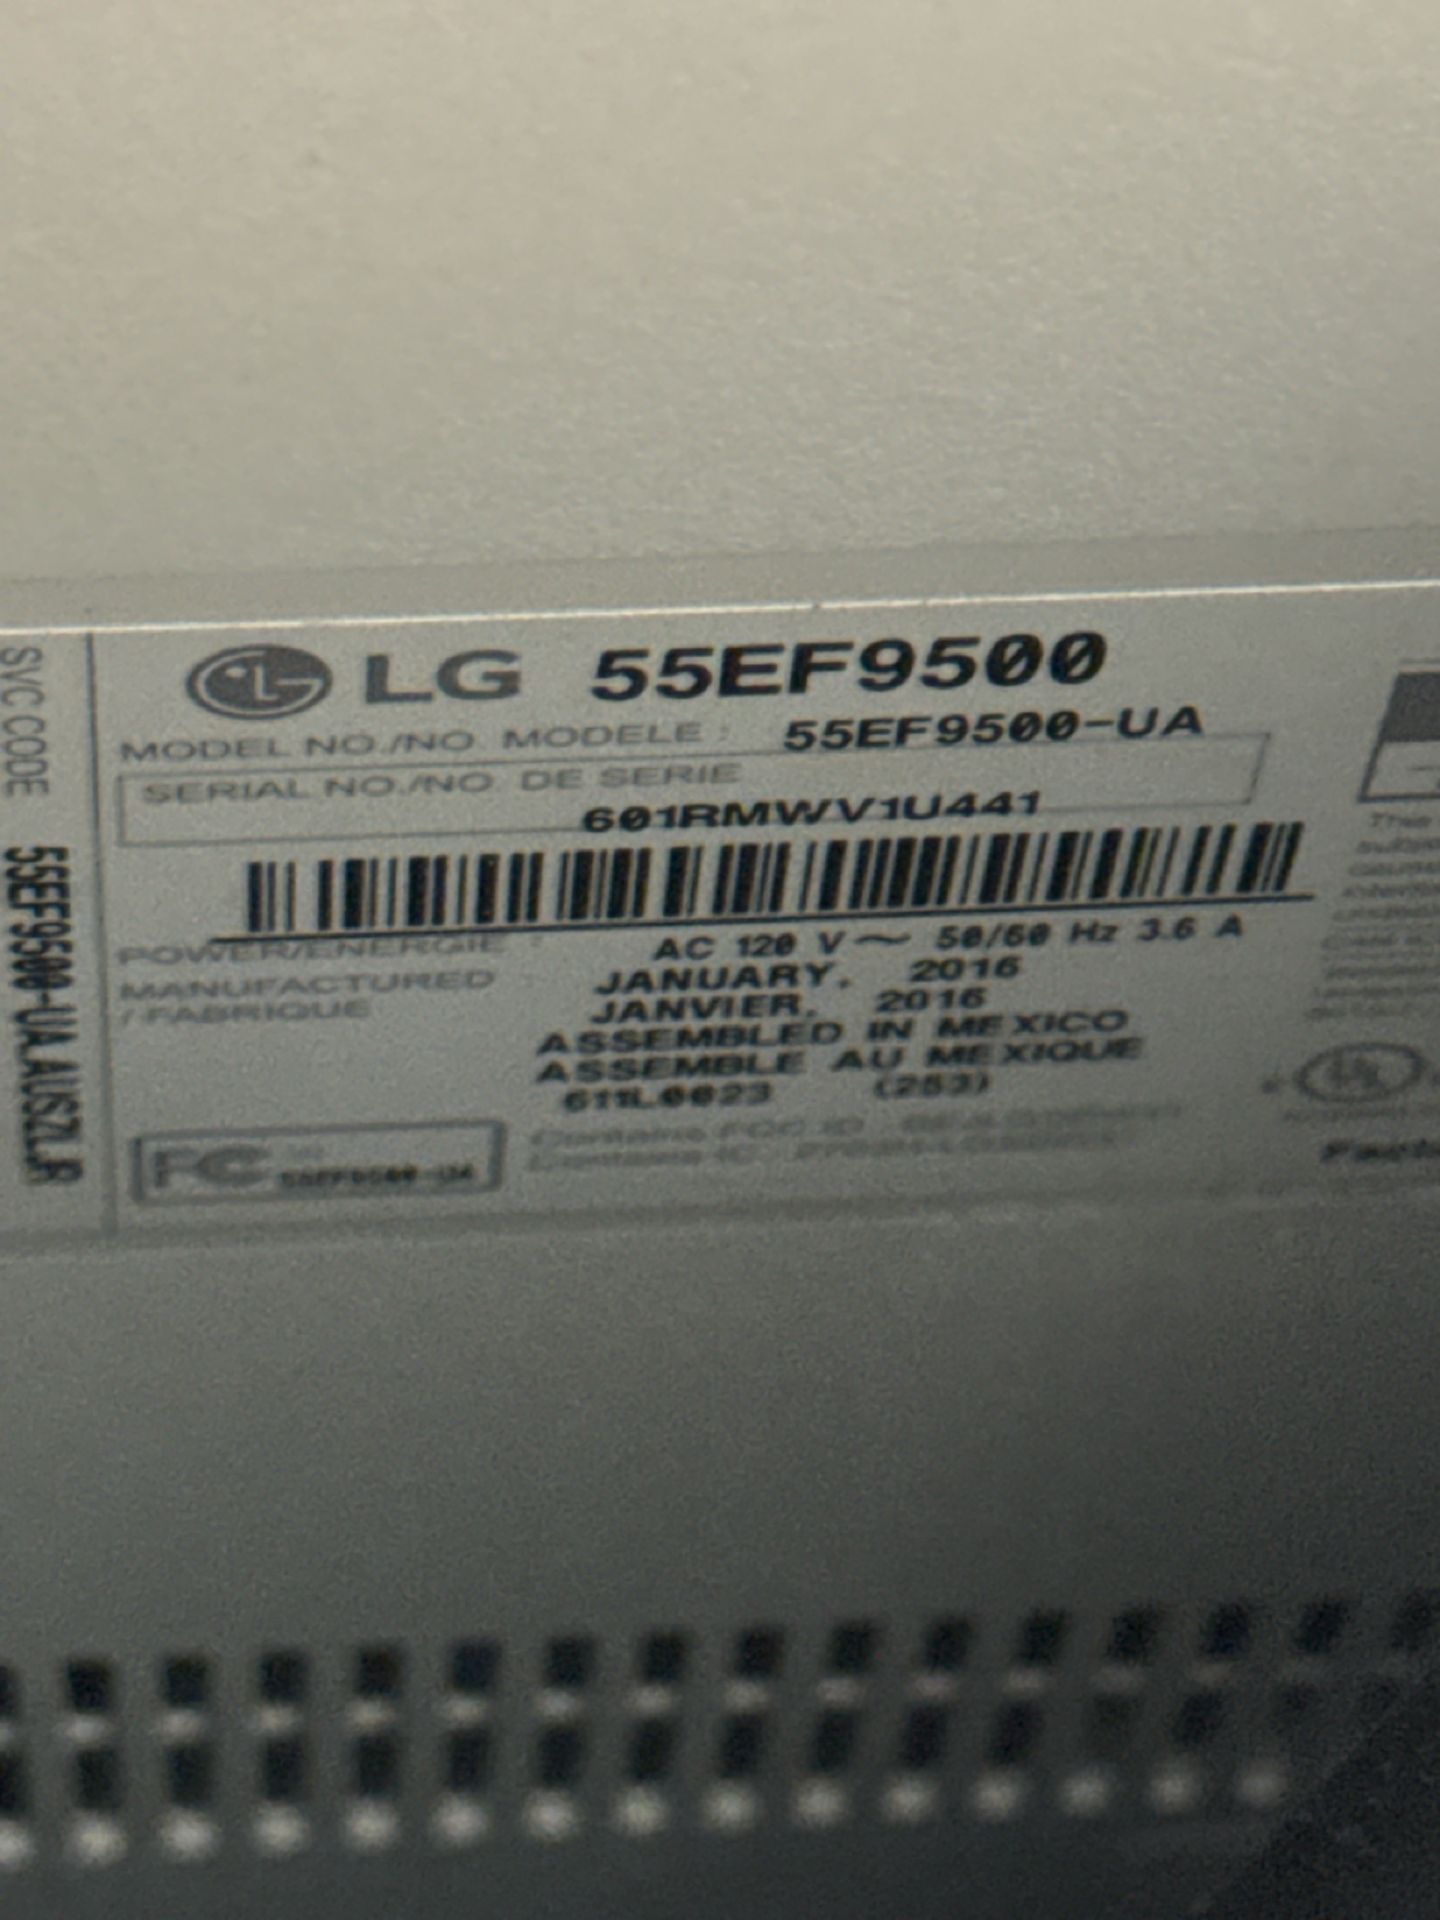 Samsung Television & LG Television w/ Case - Image 4 of 4